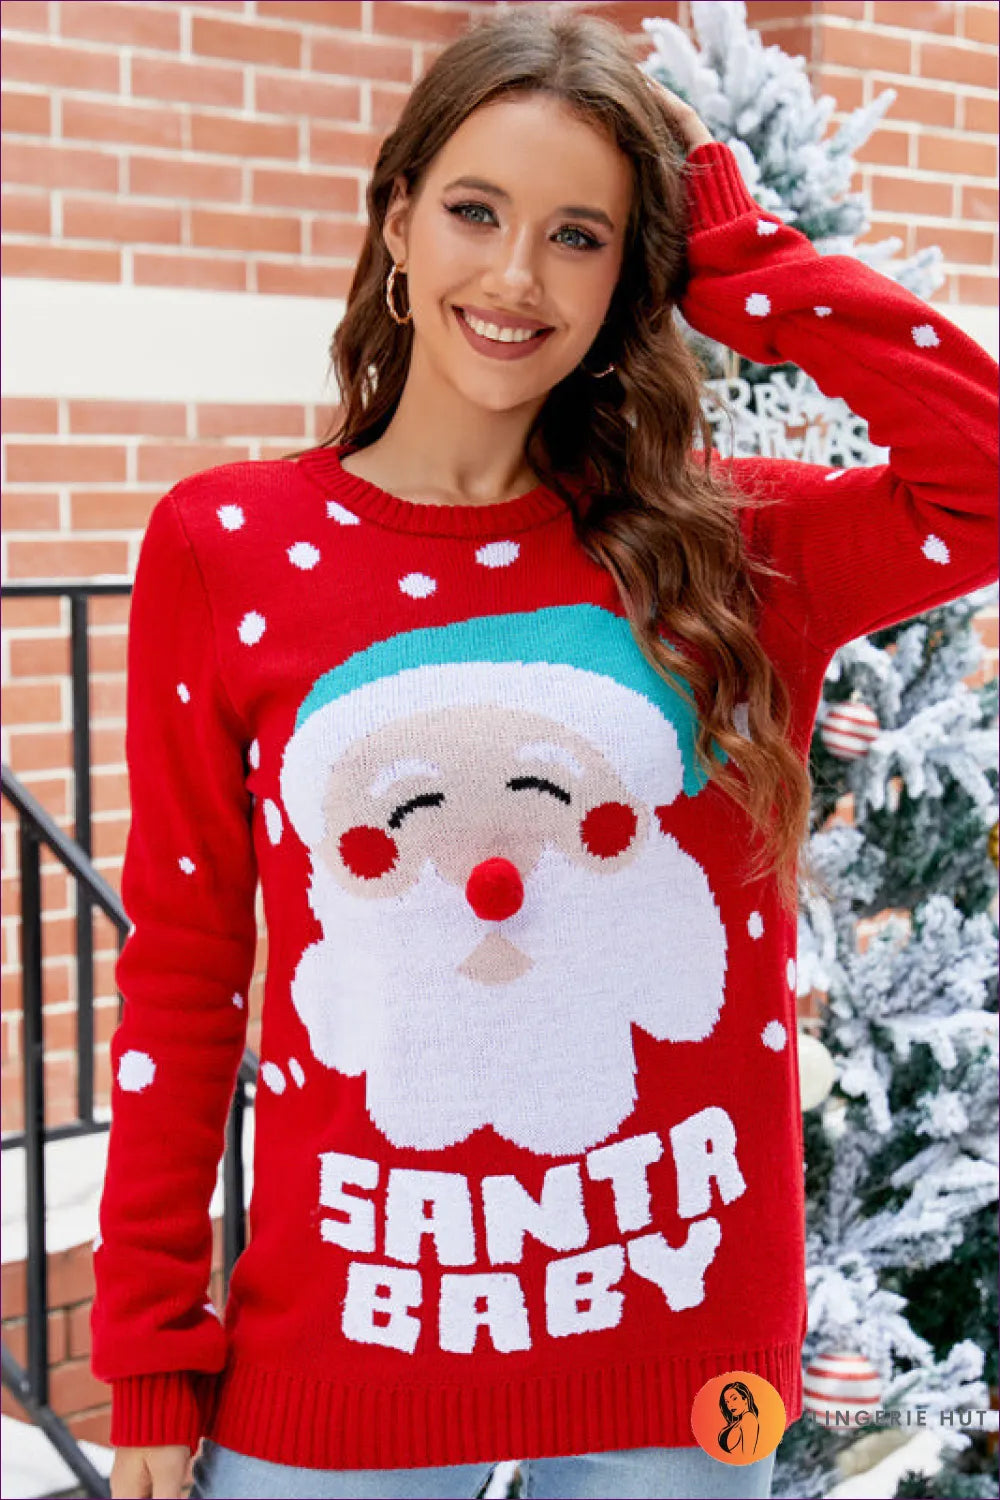 Make a Statement This Festive Season With Lingerie Hut’s Santa Claus Letter Embroidery Red Pullover. Loose Fit